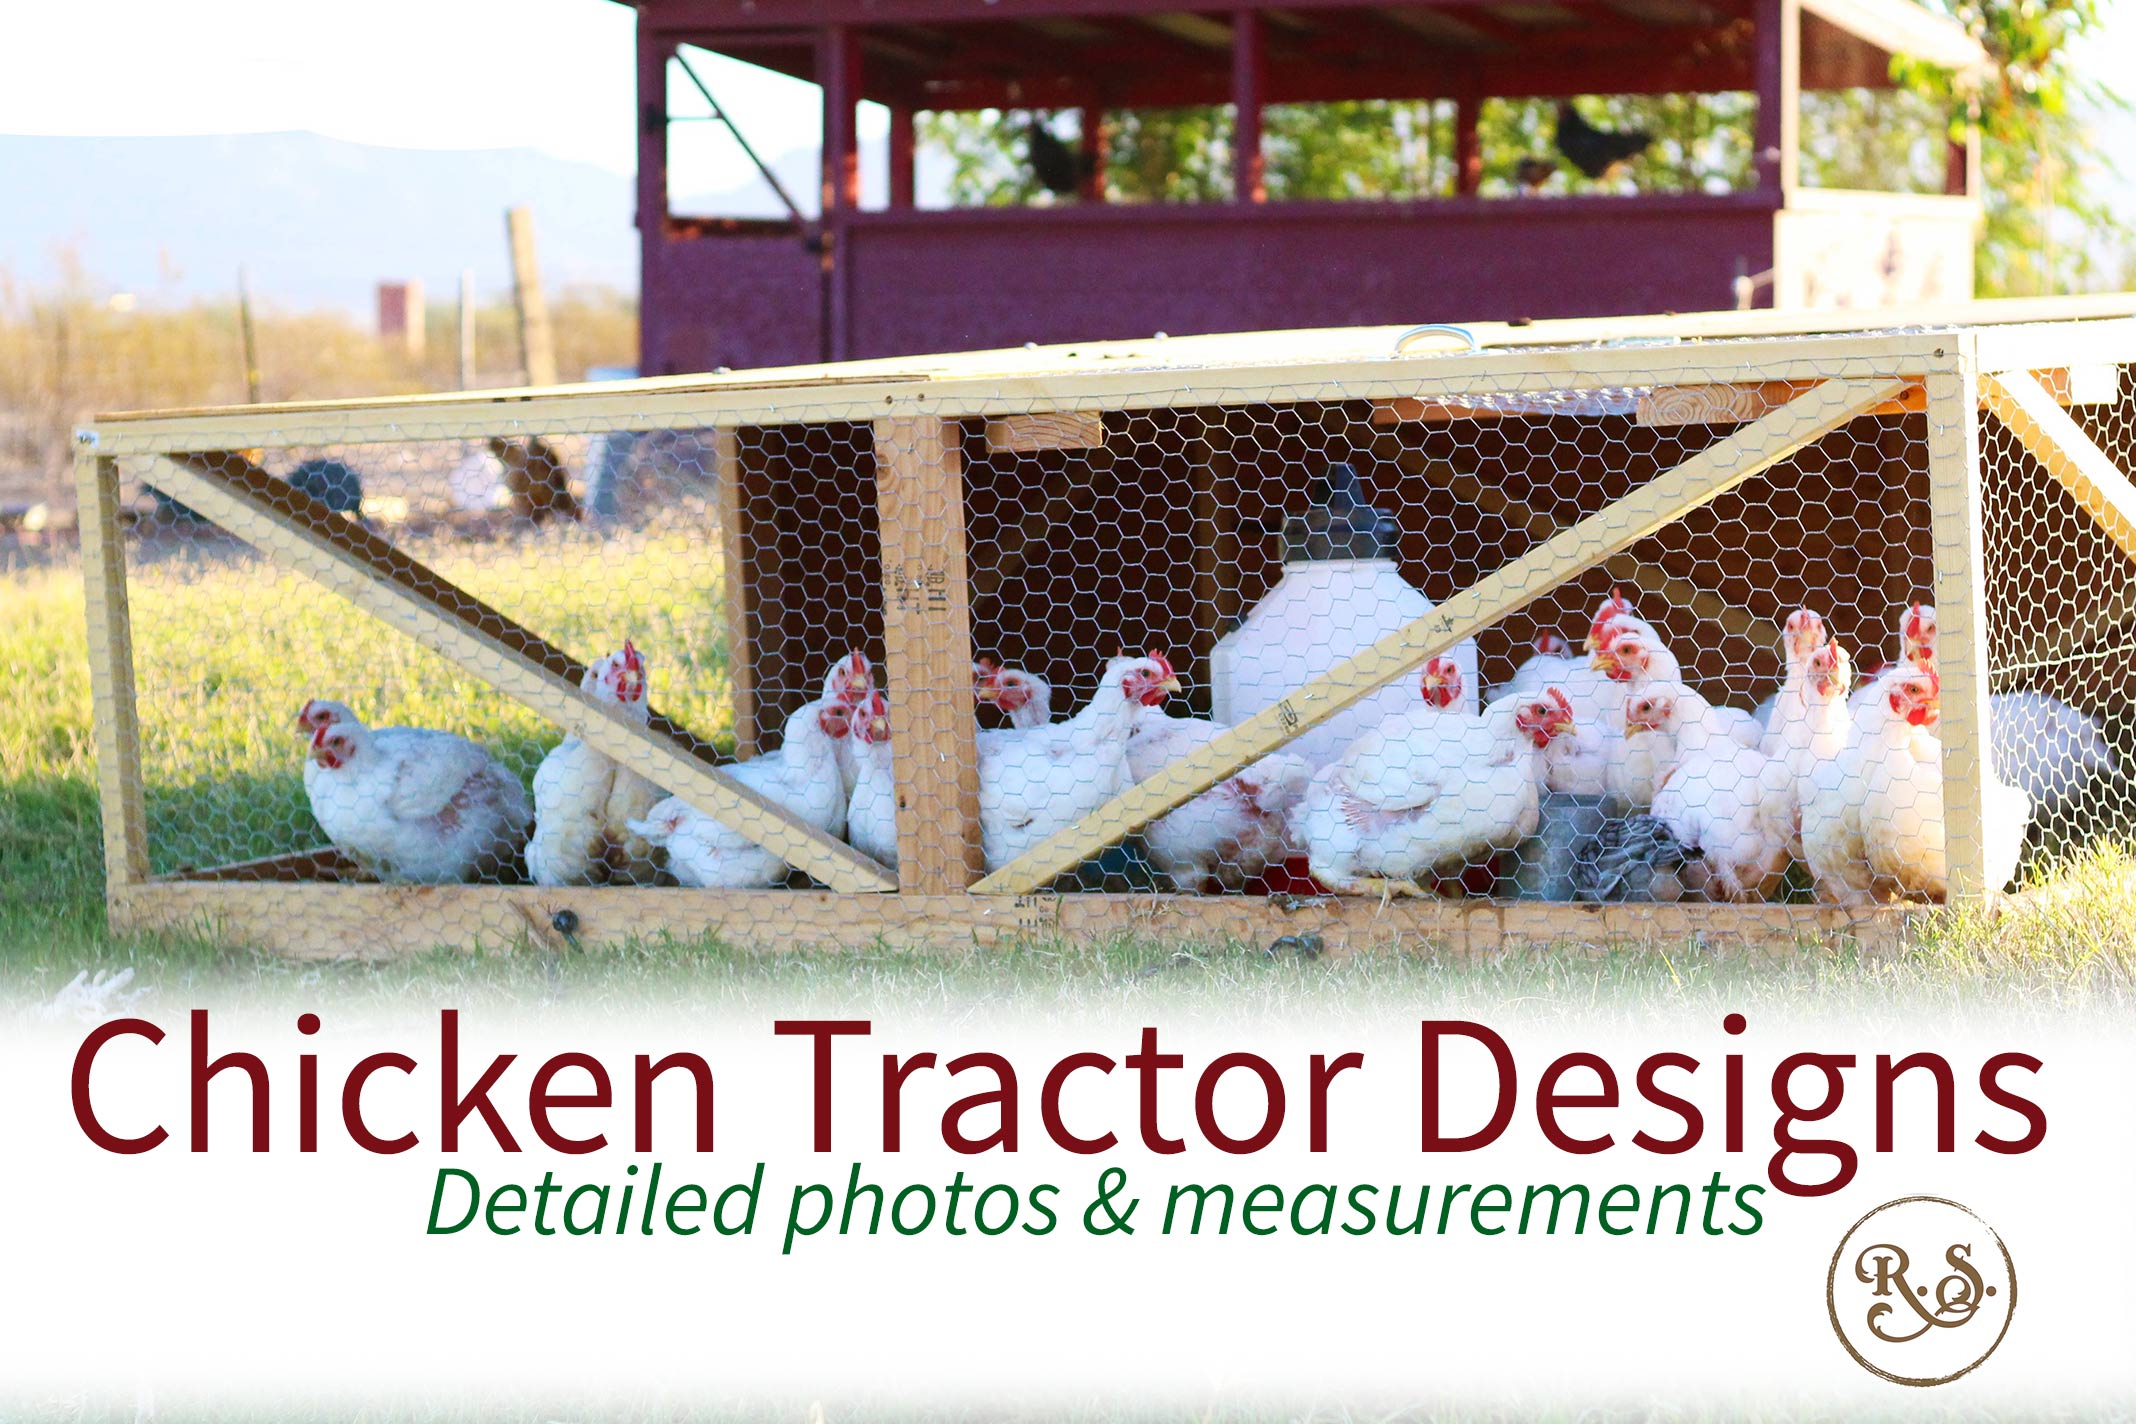 Chicken tractor designs for your meat chickens. Free Dimensions (DIY Plans) with wheels for your broilers moveable and portable coop. For free-range, pastured chickens on grass. Easy to make.